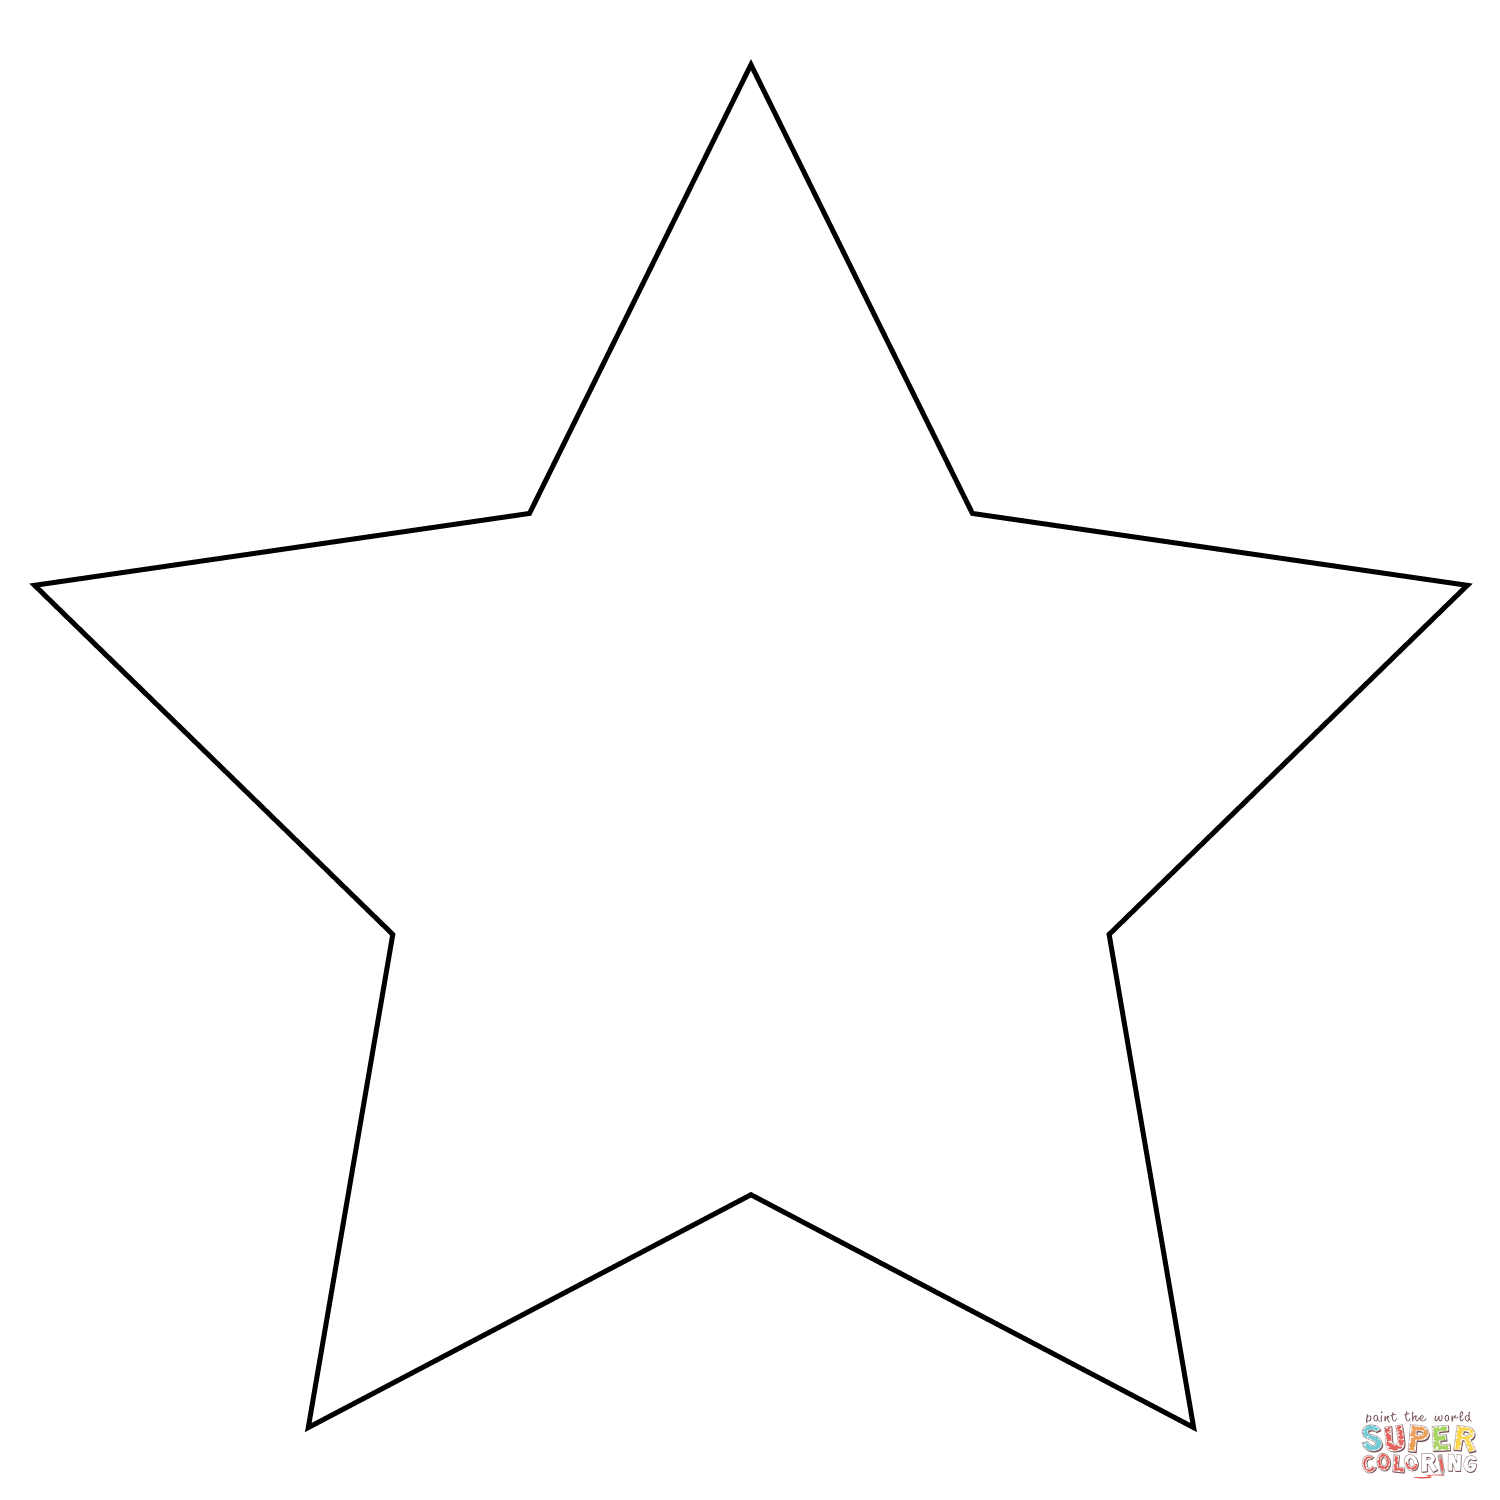 Free Star Coloring Pages For Preschoolers, Download Free Star Coloring